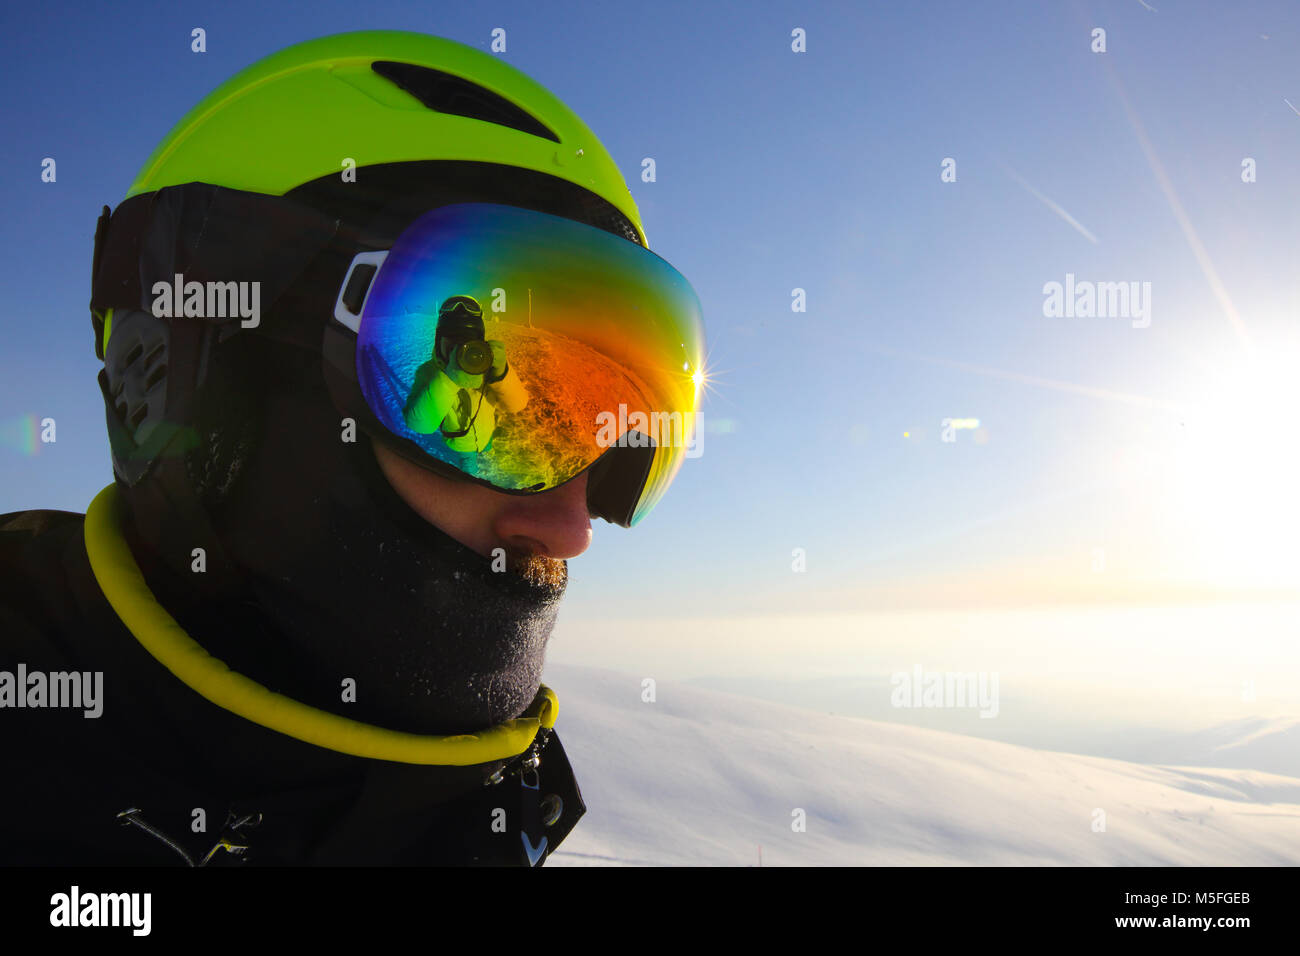 Skier wearing helmet and goggles in mountains close up portrait Stock Photo